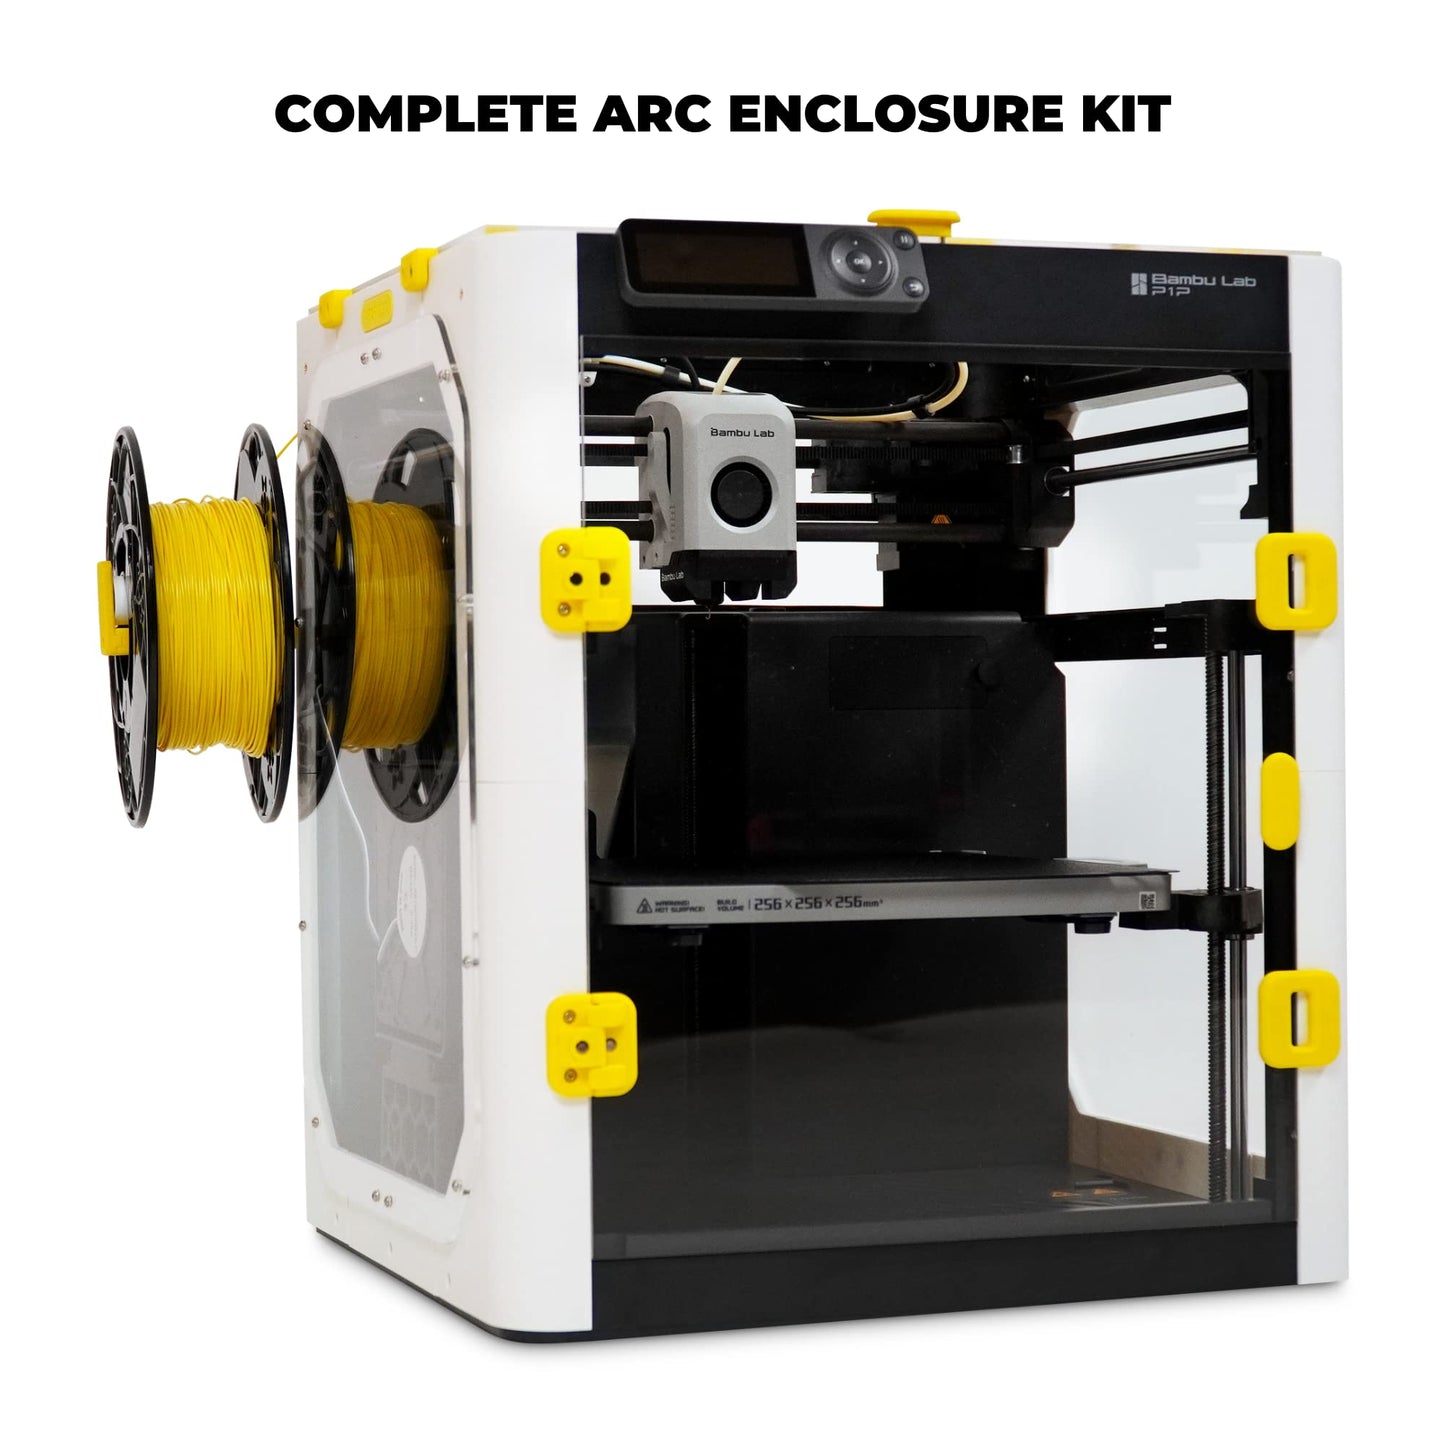 ARC Enclosure Kit for the Bambu Lab P1P by ThrutheFrame